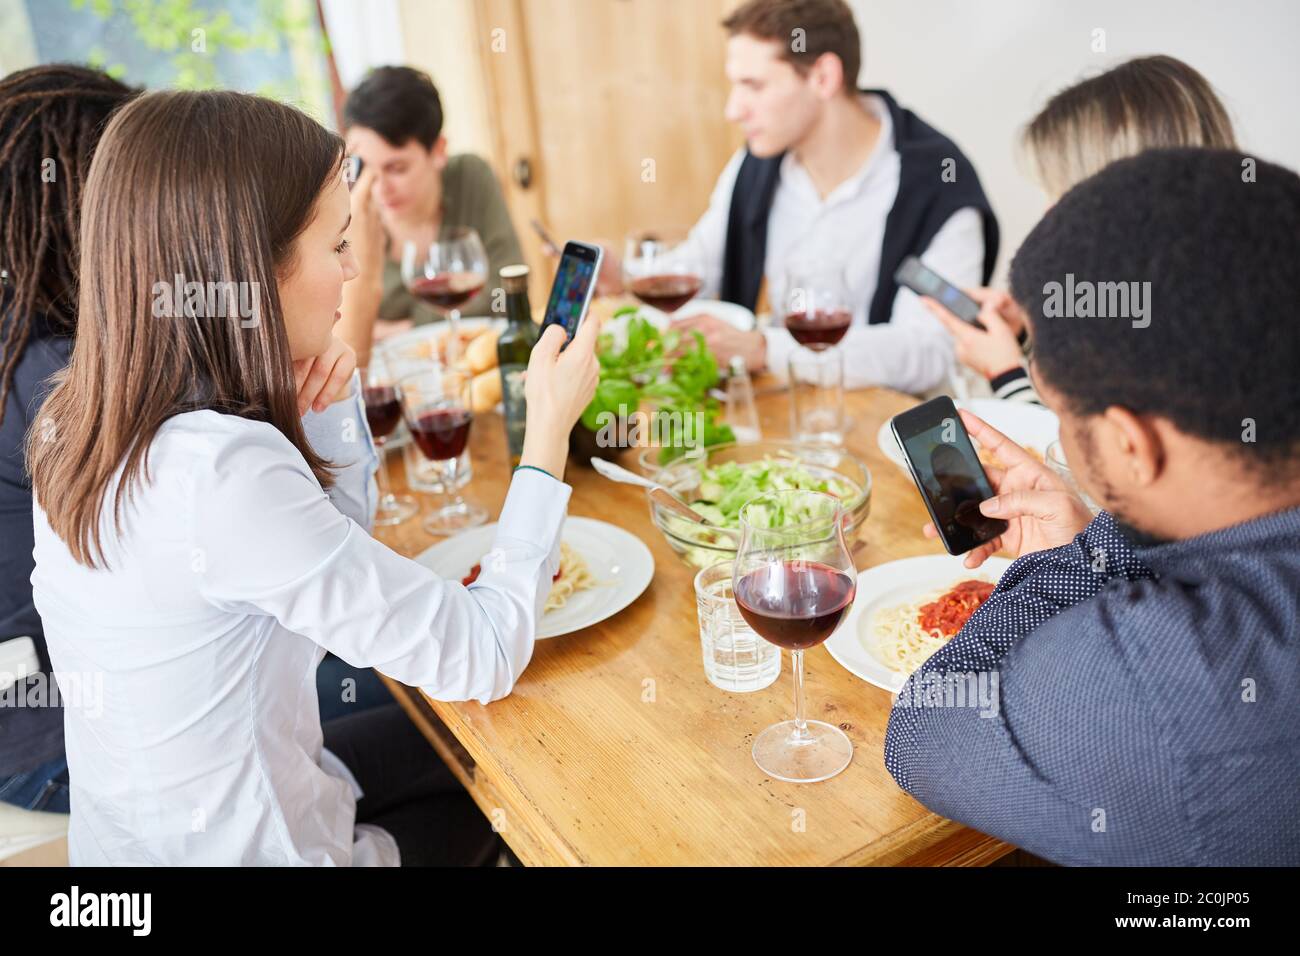 Distracted friends all look at their smartphone while having lunch together at the table Stock Photo